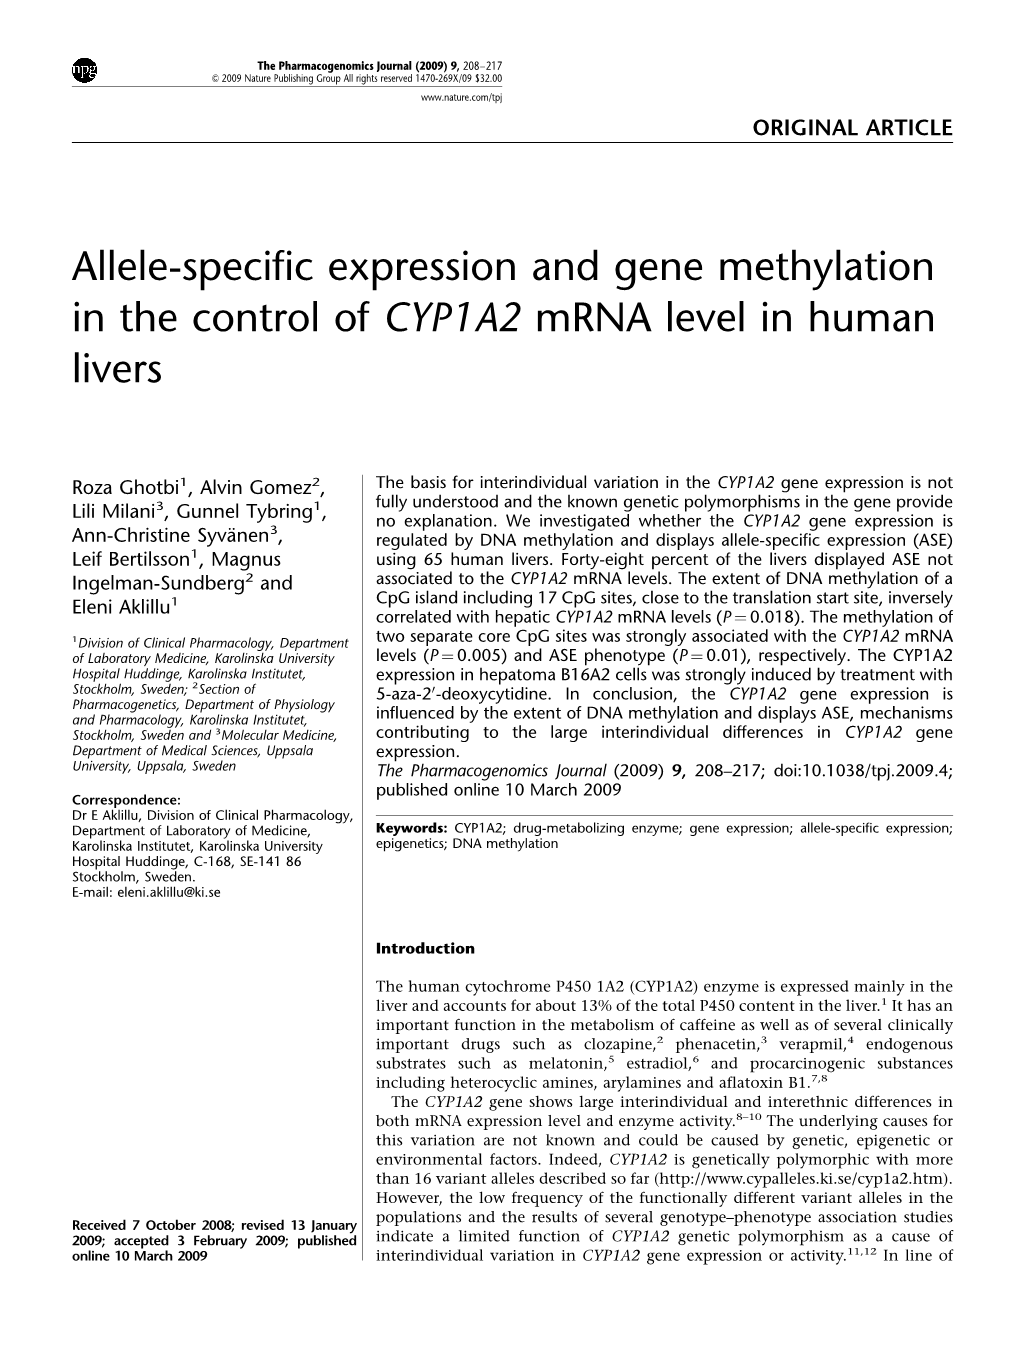 Allele-Specific Expression and Gene Methylation in the Control of CYP1A2 Mrna Level in Human Livers